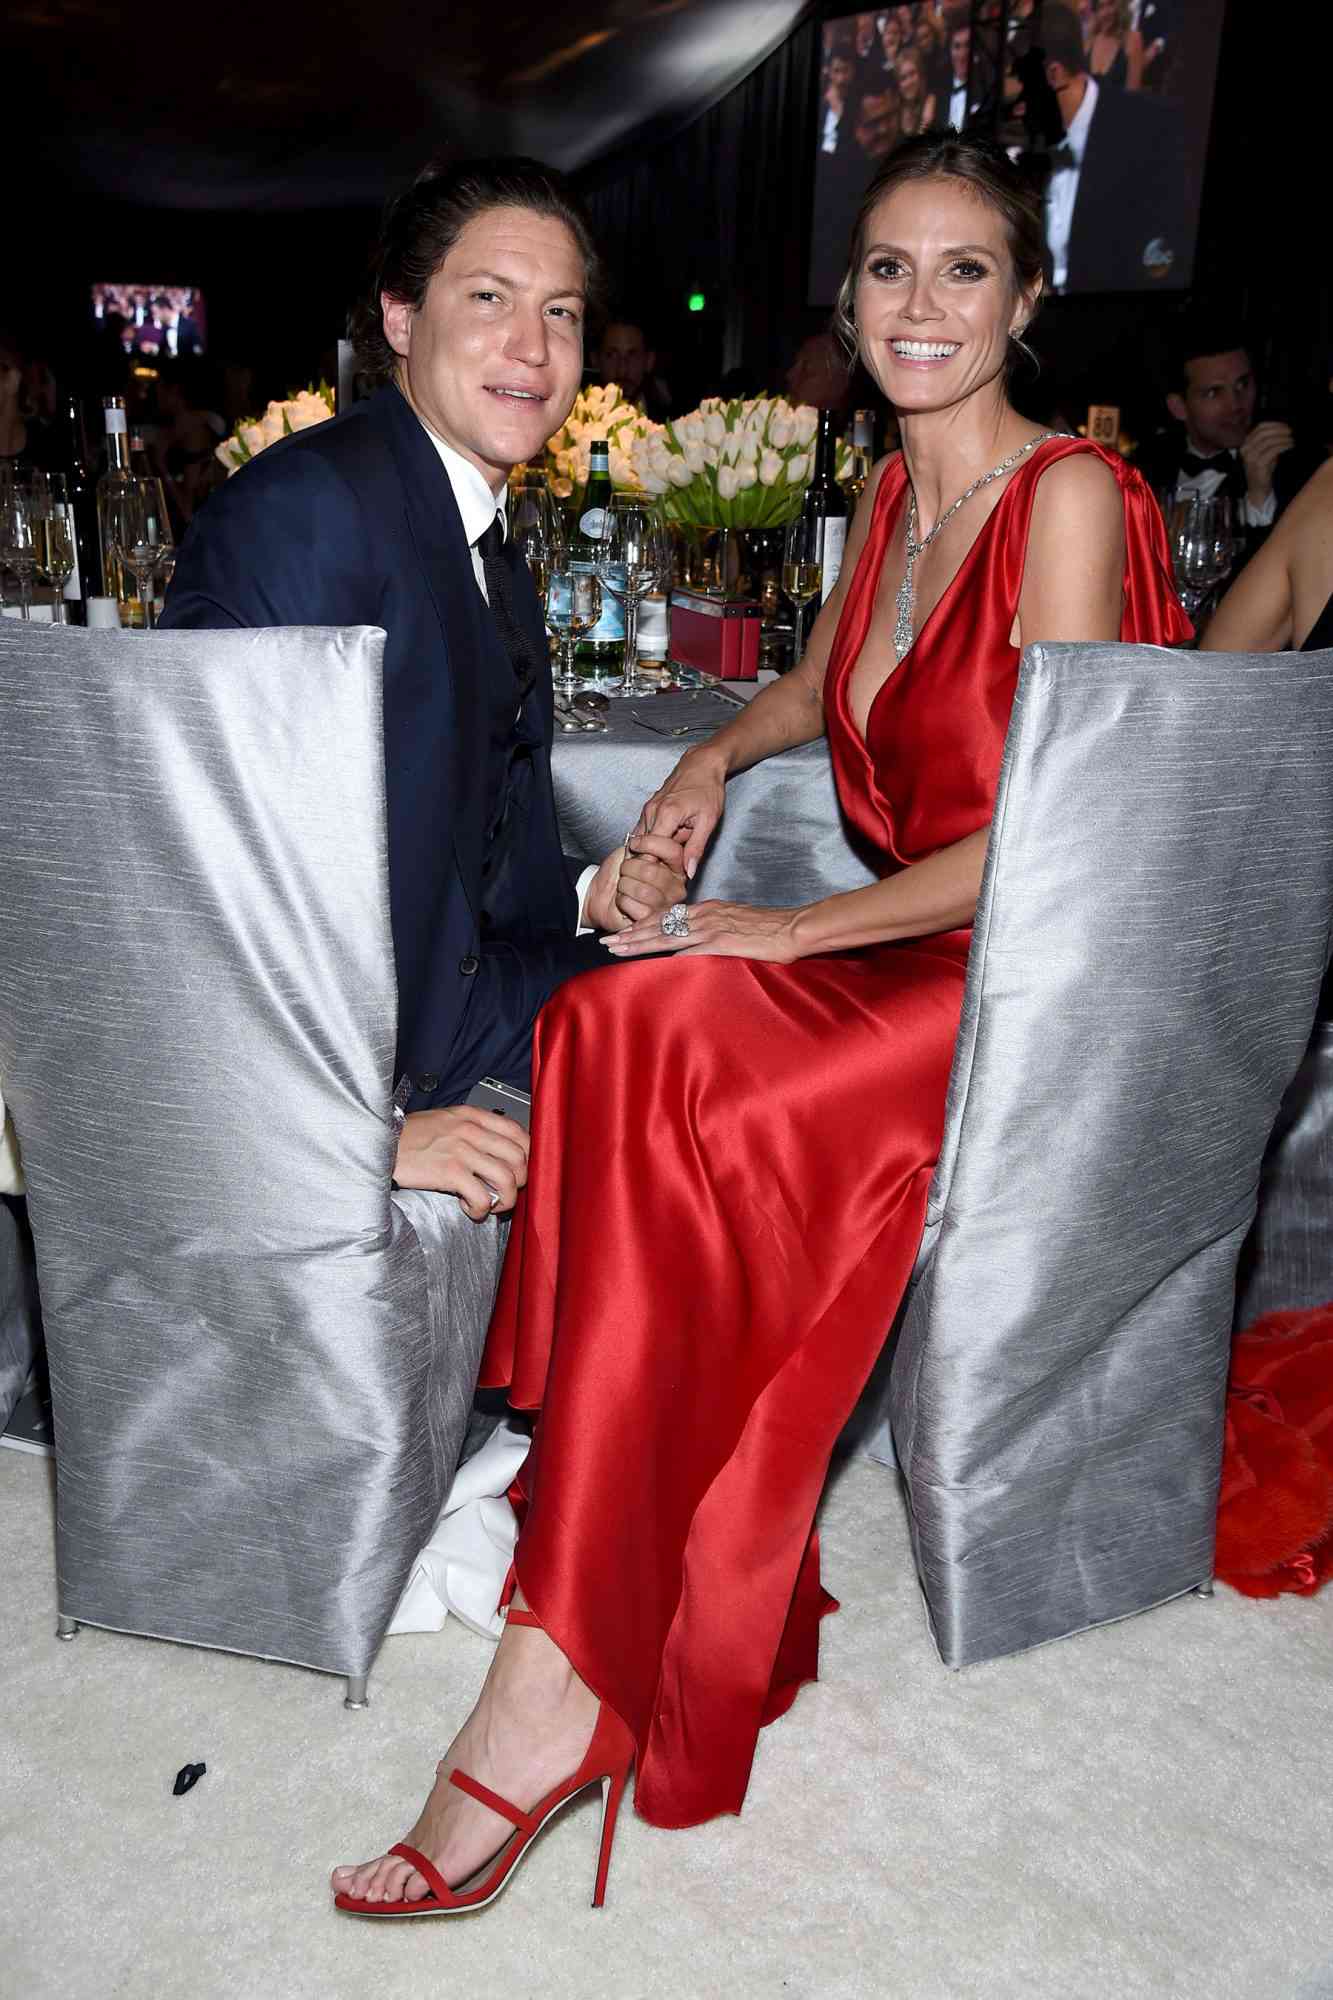 Vito Schnabel and Heidi Klum&nbsp;at&nbsp;the 25th Annual Elton John AIDS Foundation's Academy Awards Viewing Party